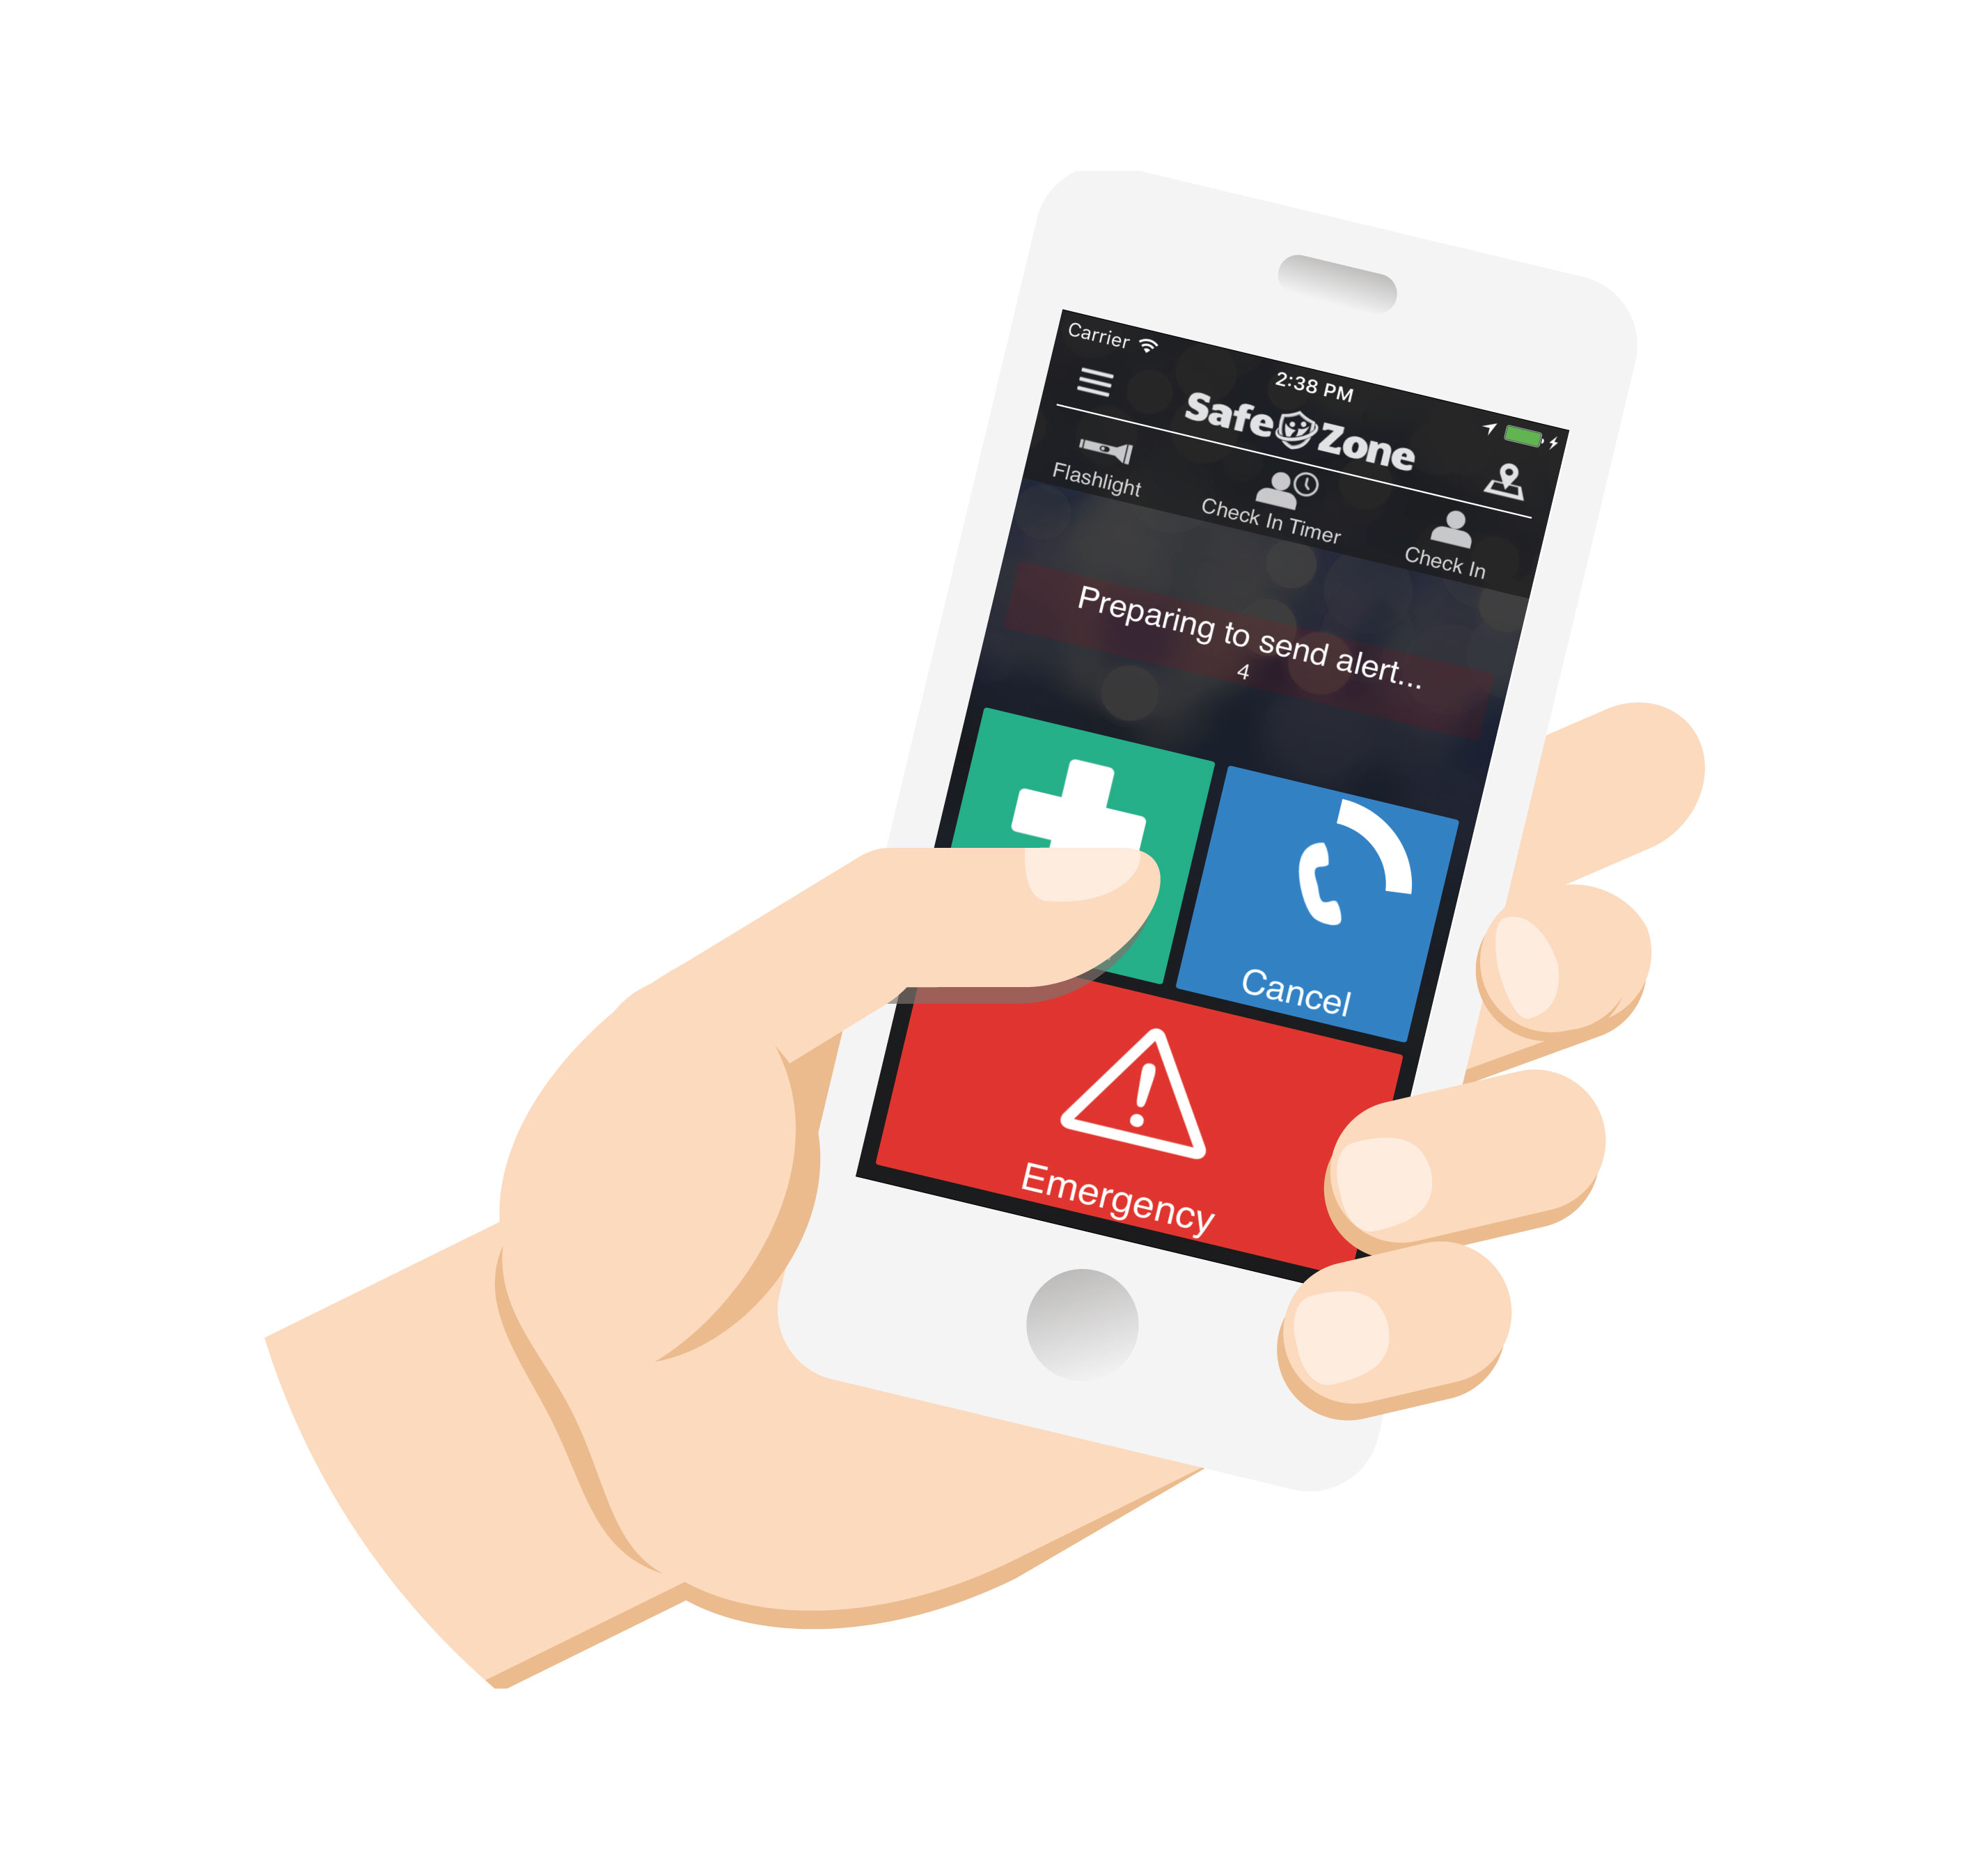 Hand holding phone with safezone app on